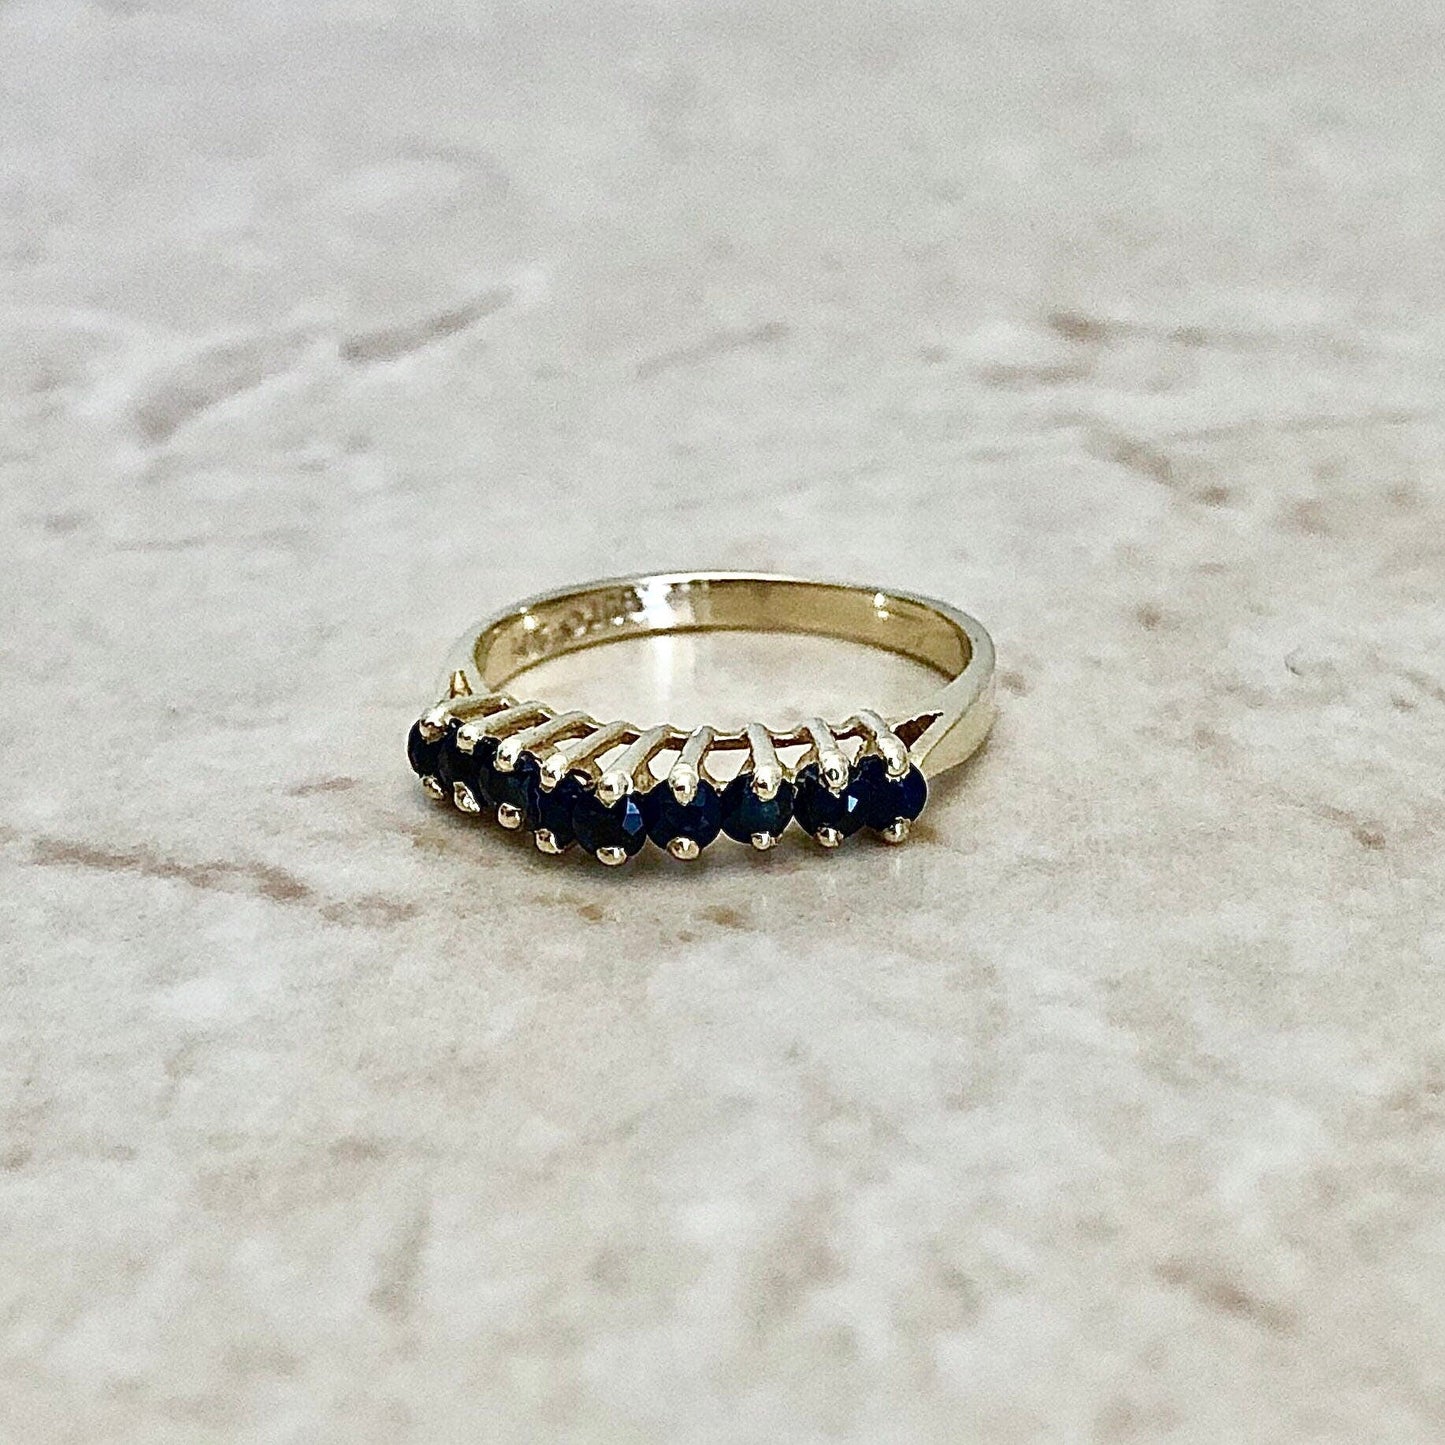 Vintage 14K Natural Sapphire Band - Yellow Gold - Genuine Gemstone Ring - Size 5.75 US - Birthday Gift For Her - September Birthstone